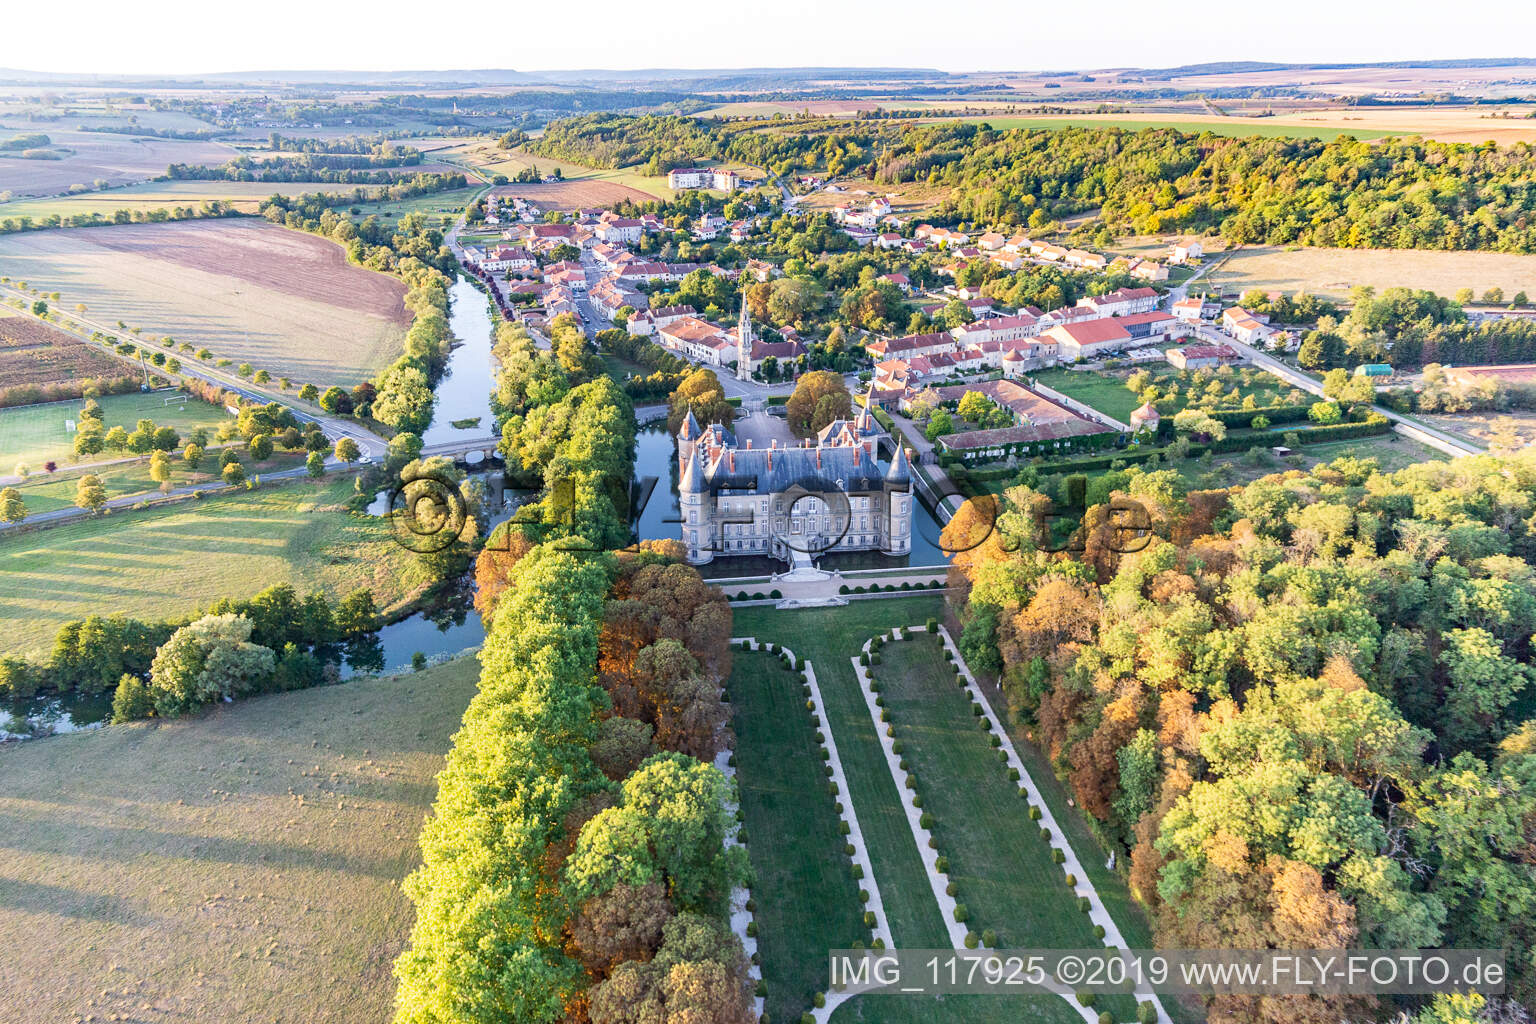 Drone recording of Chateau de Haroué in Haroué in the state Meurthe et Moselle, France